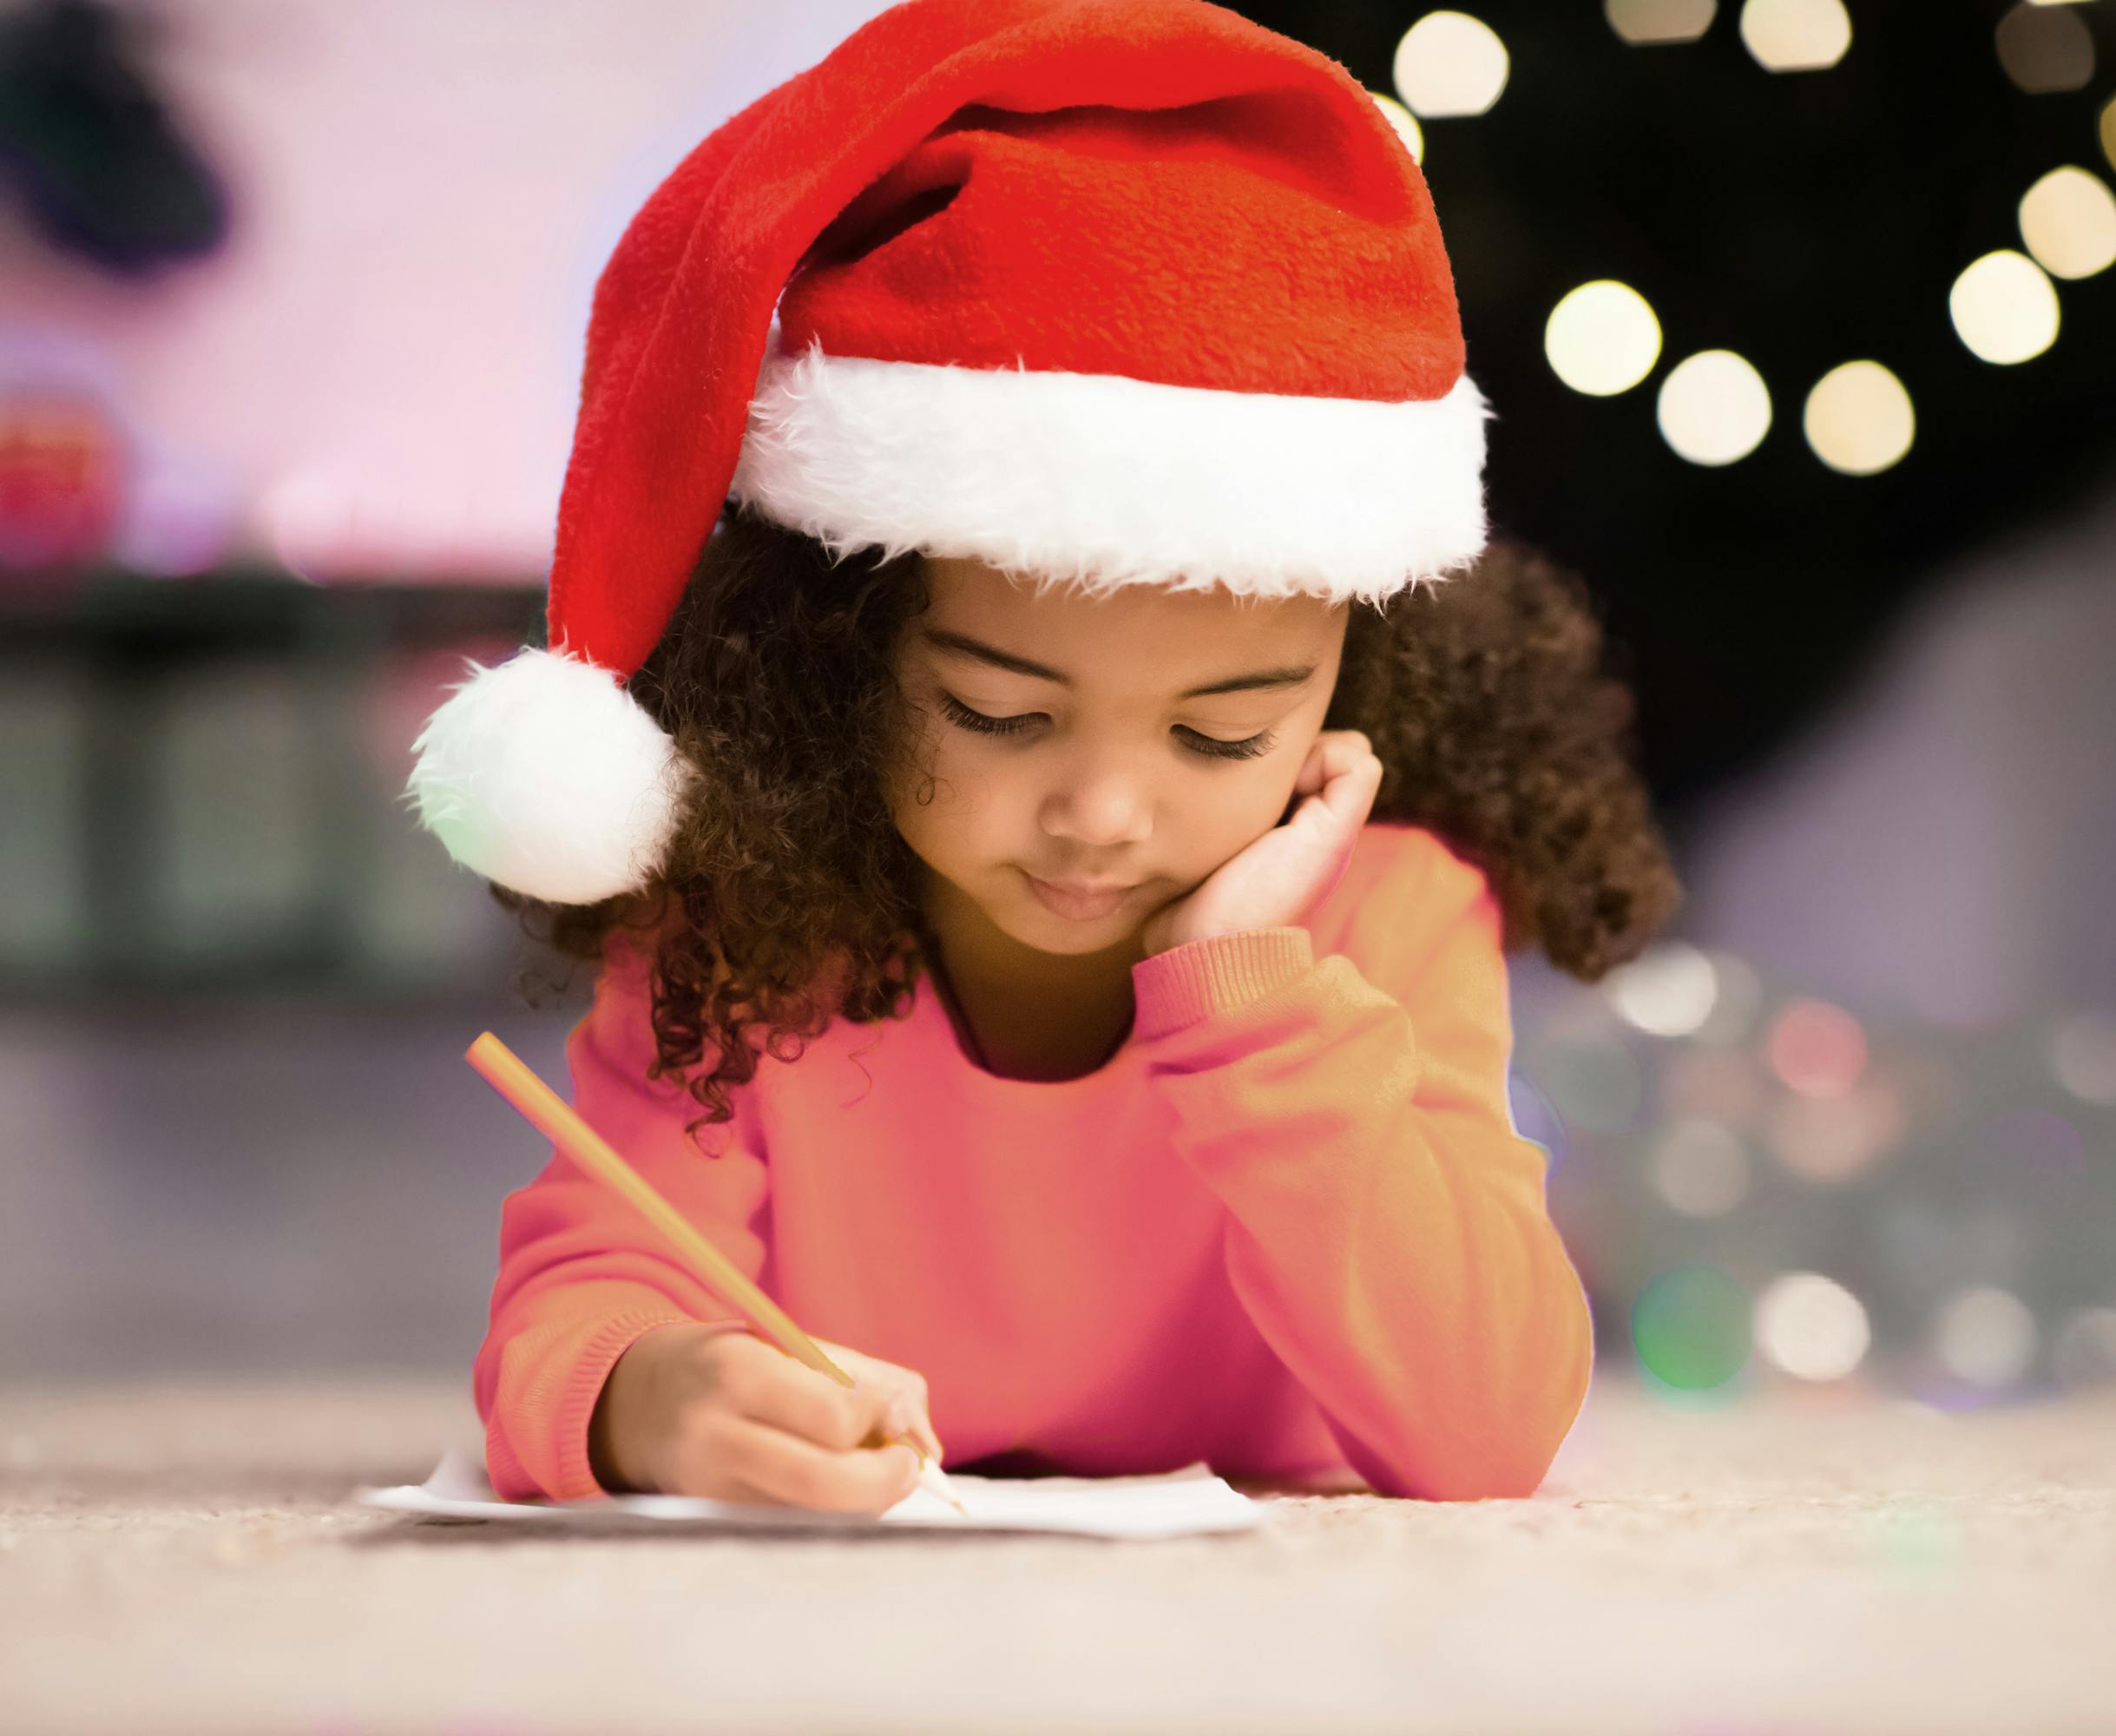 Five Ways to Make Your Letter to Santa More Magical